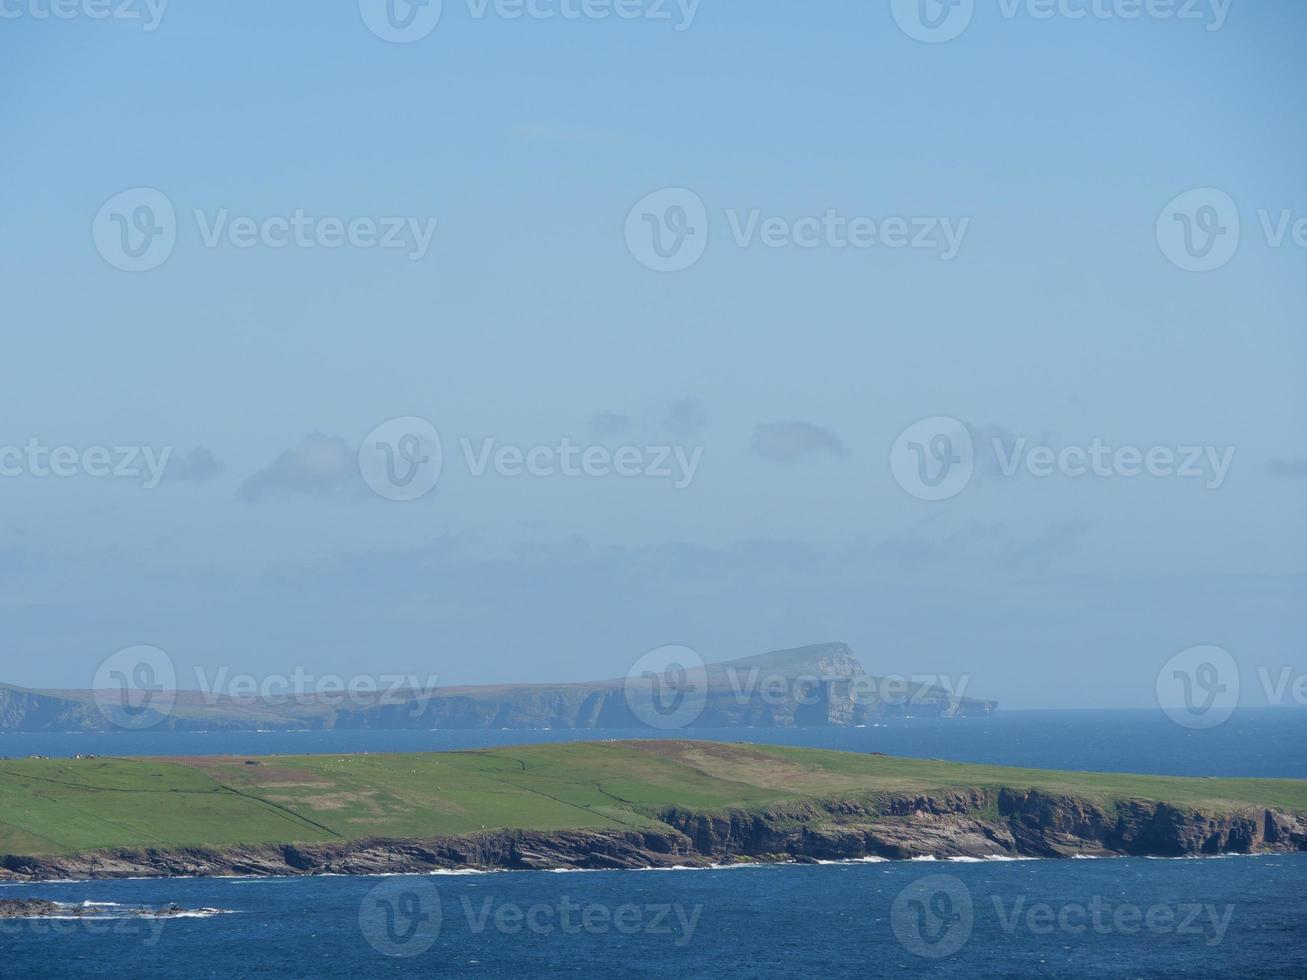 The shetland islands with the city of Lerwick in Scotland photo